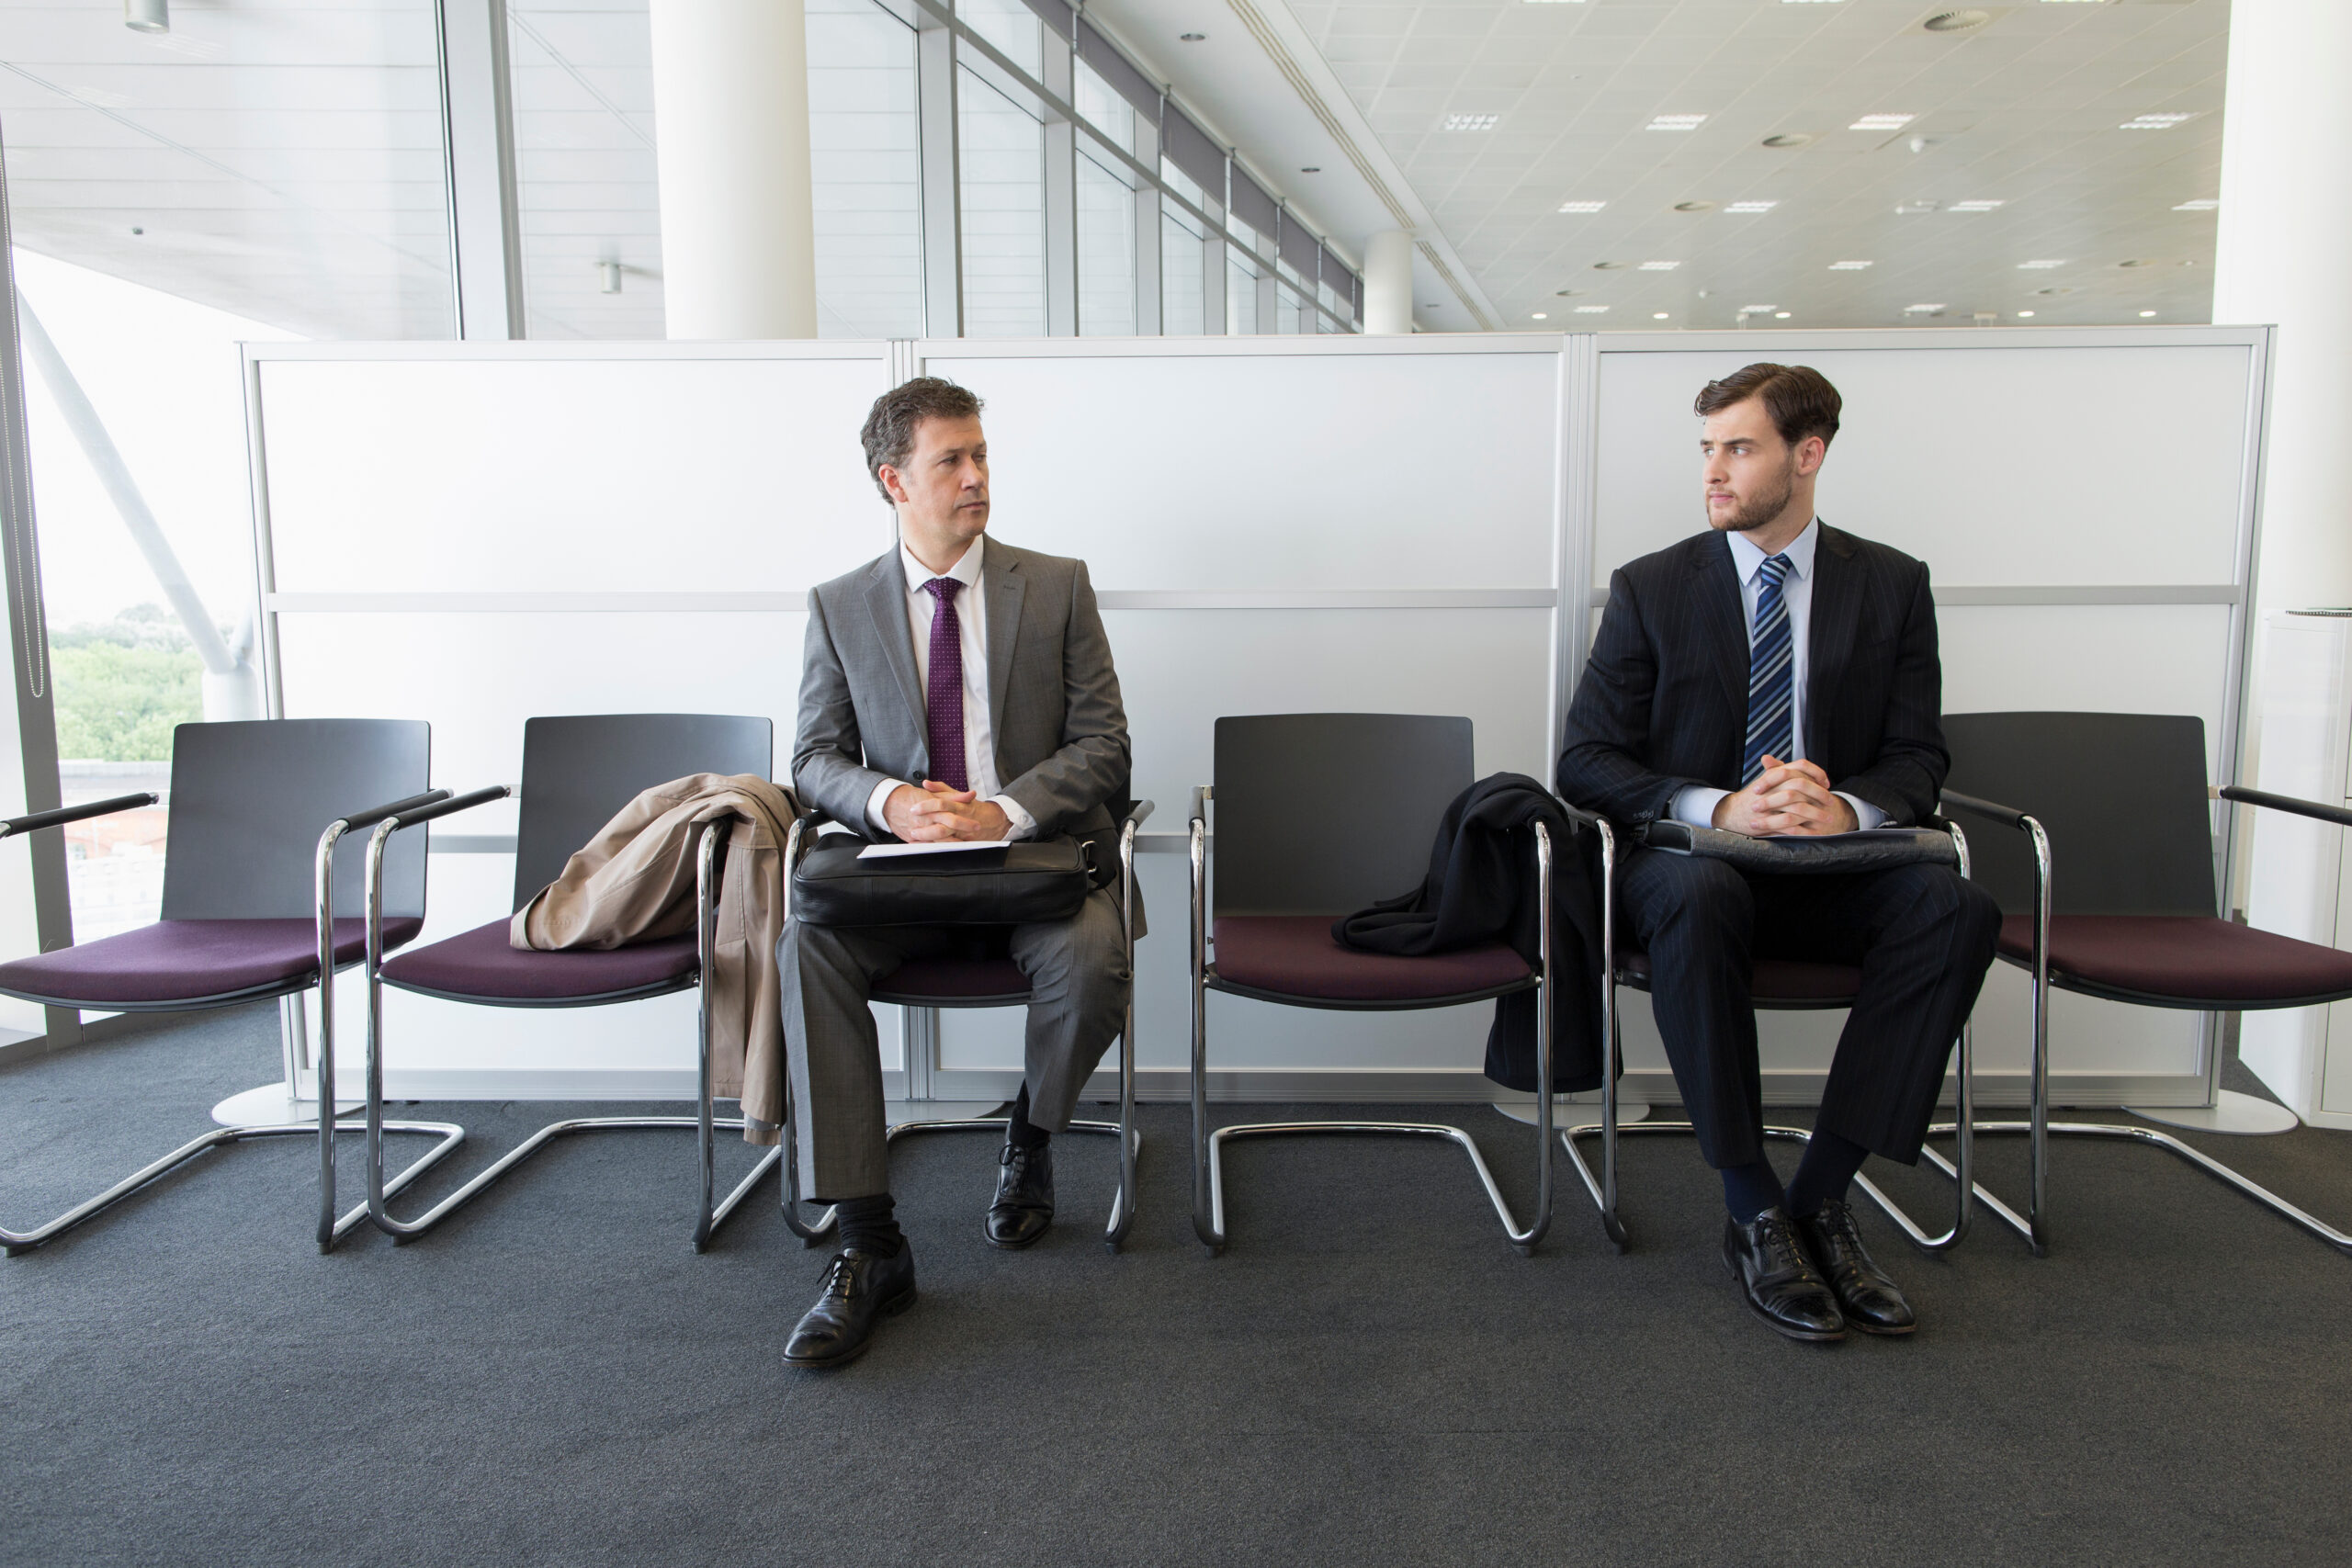 Competing businessmen waiting for job interview in office lobby